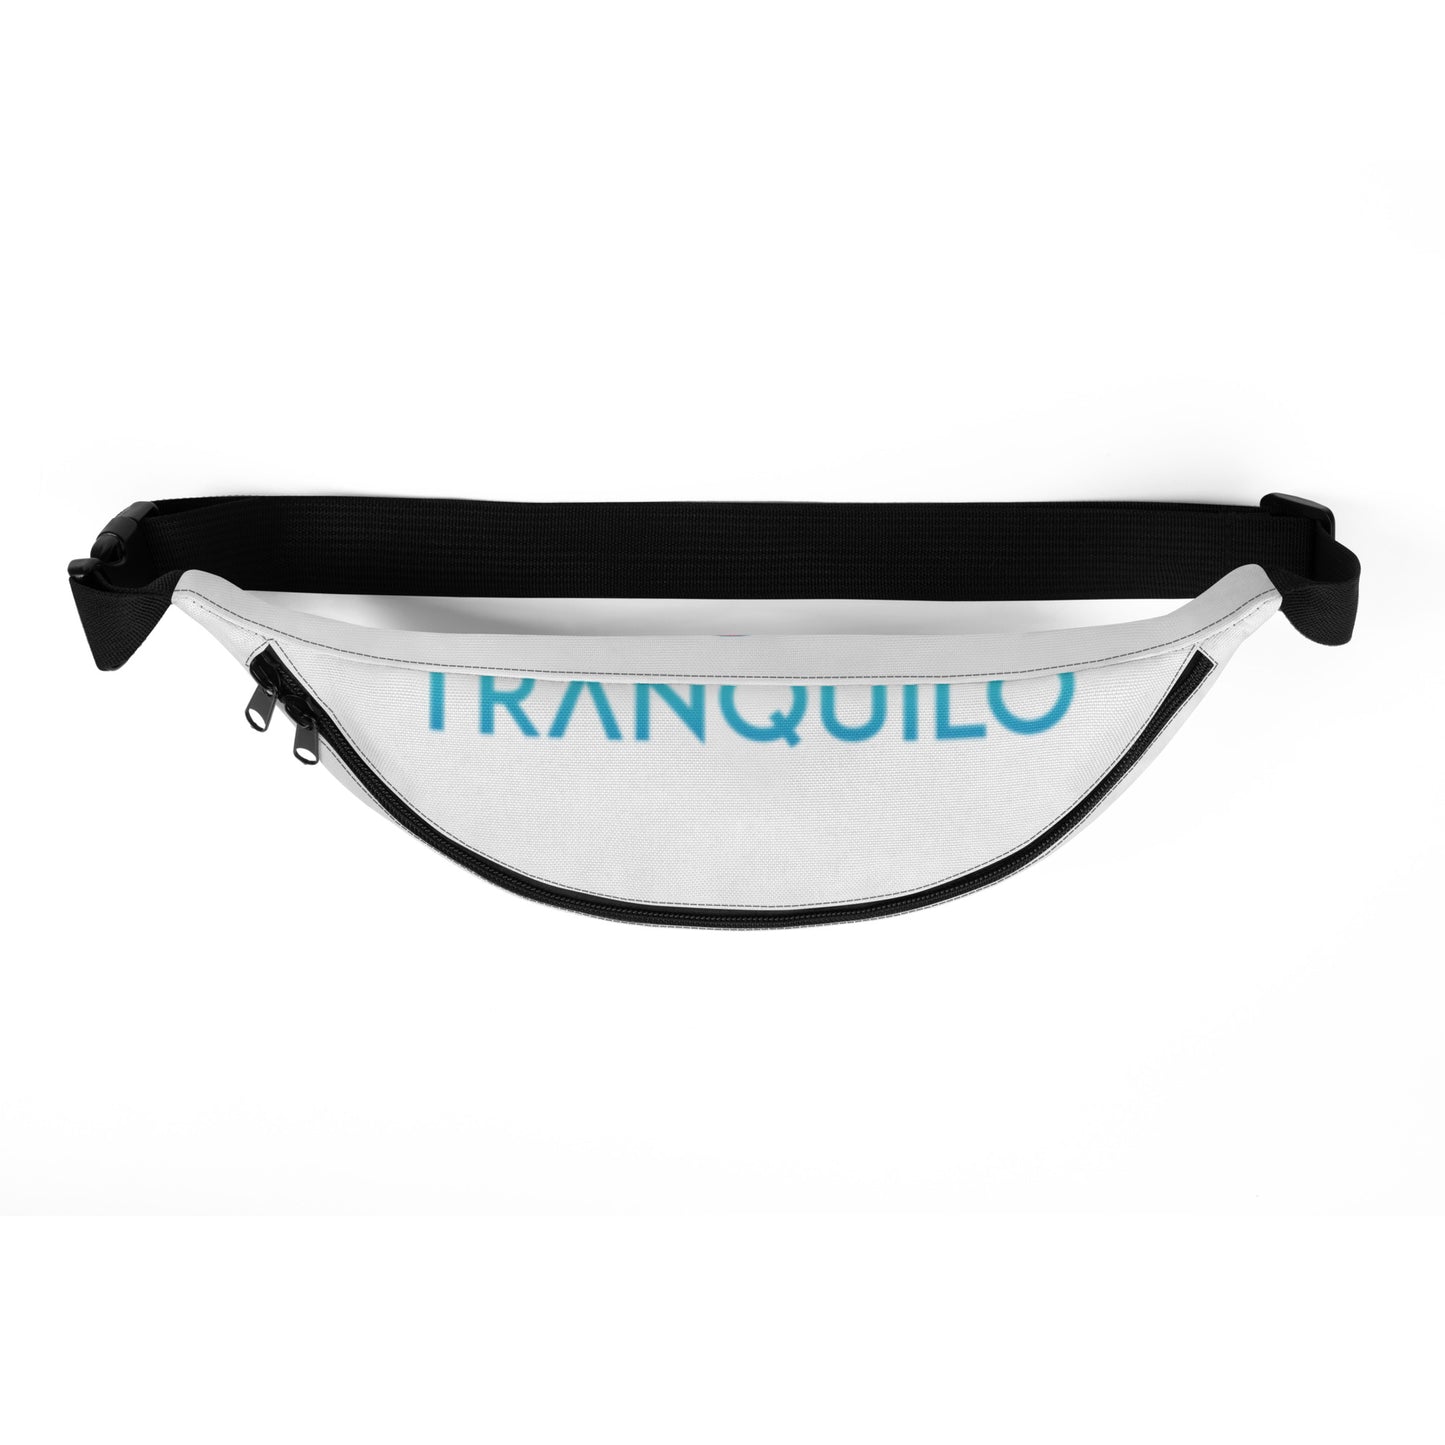 TRANQUILO Fanny Pack